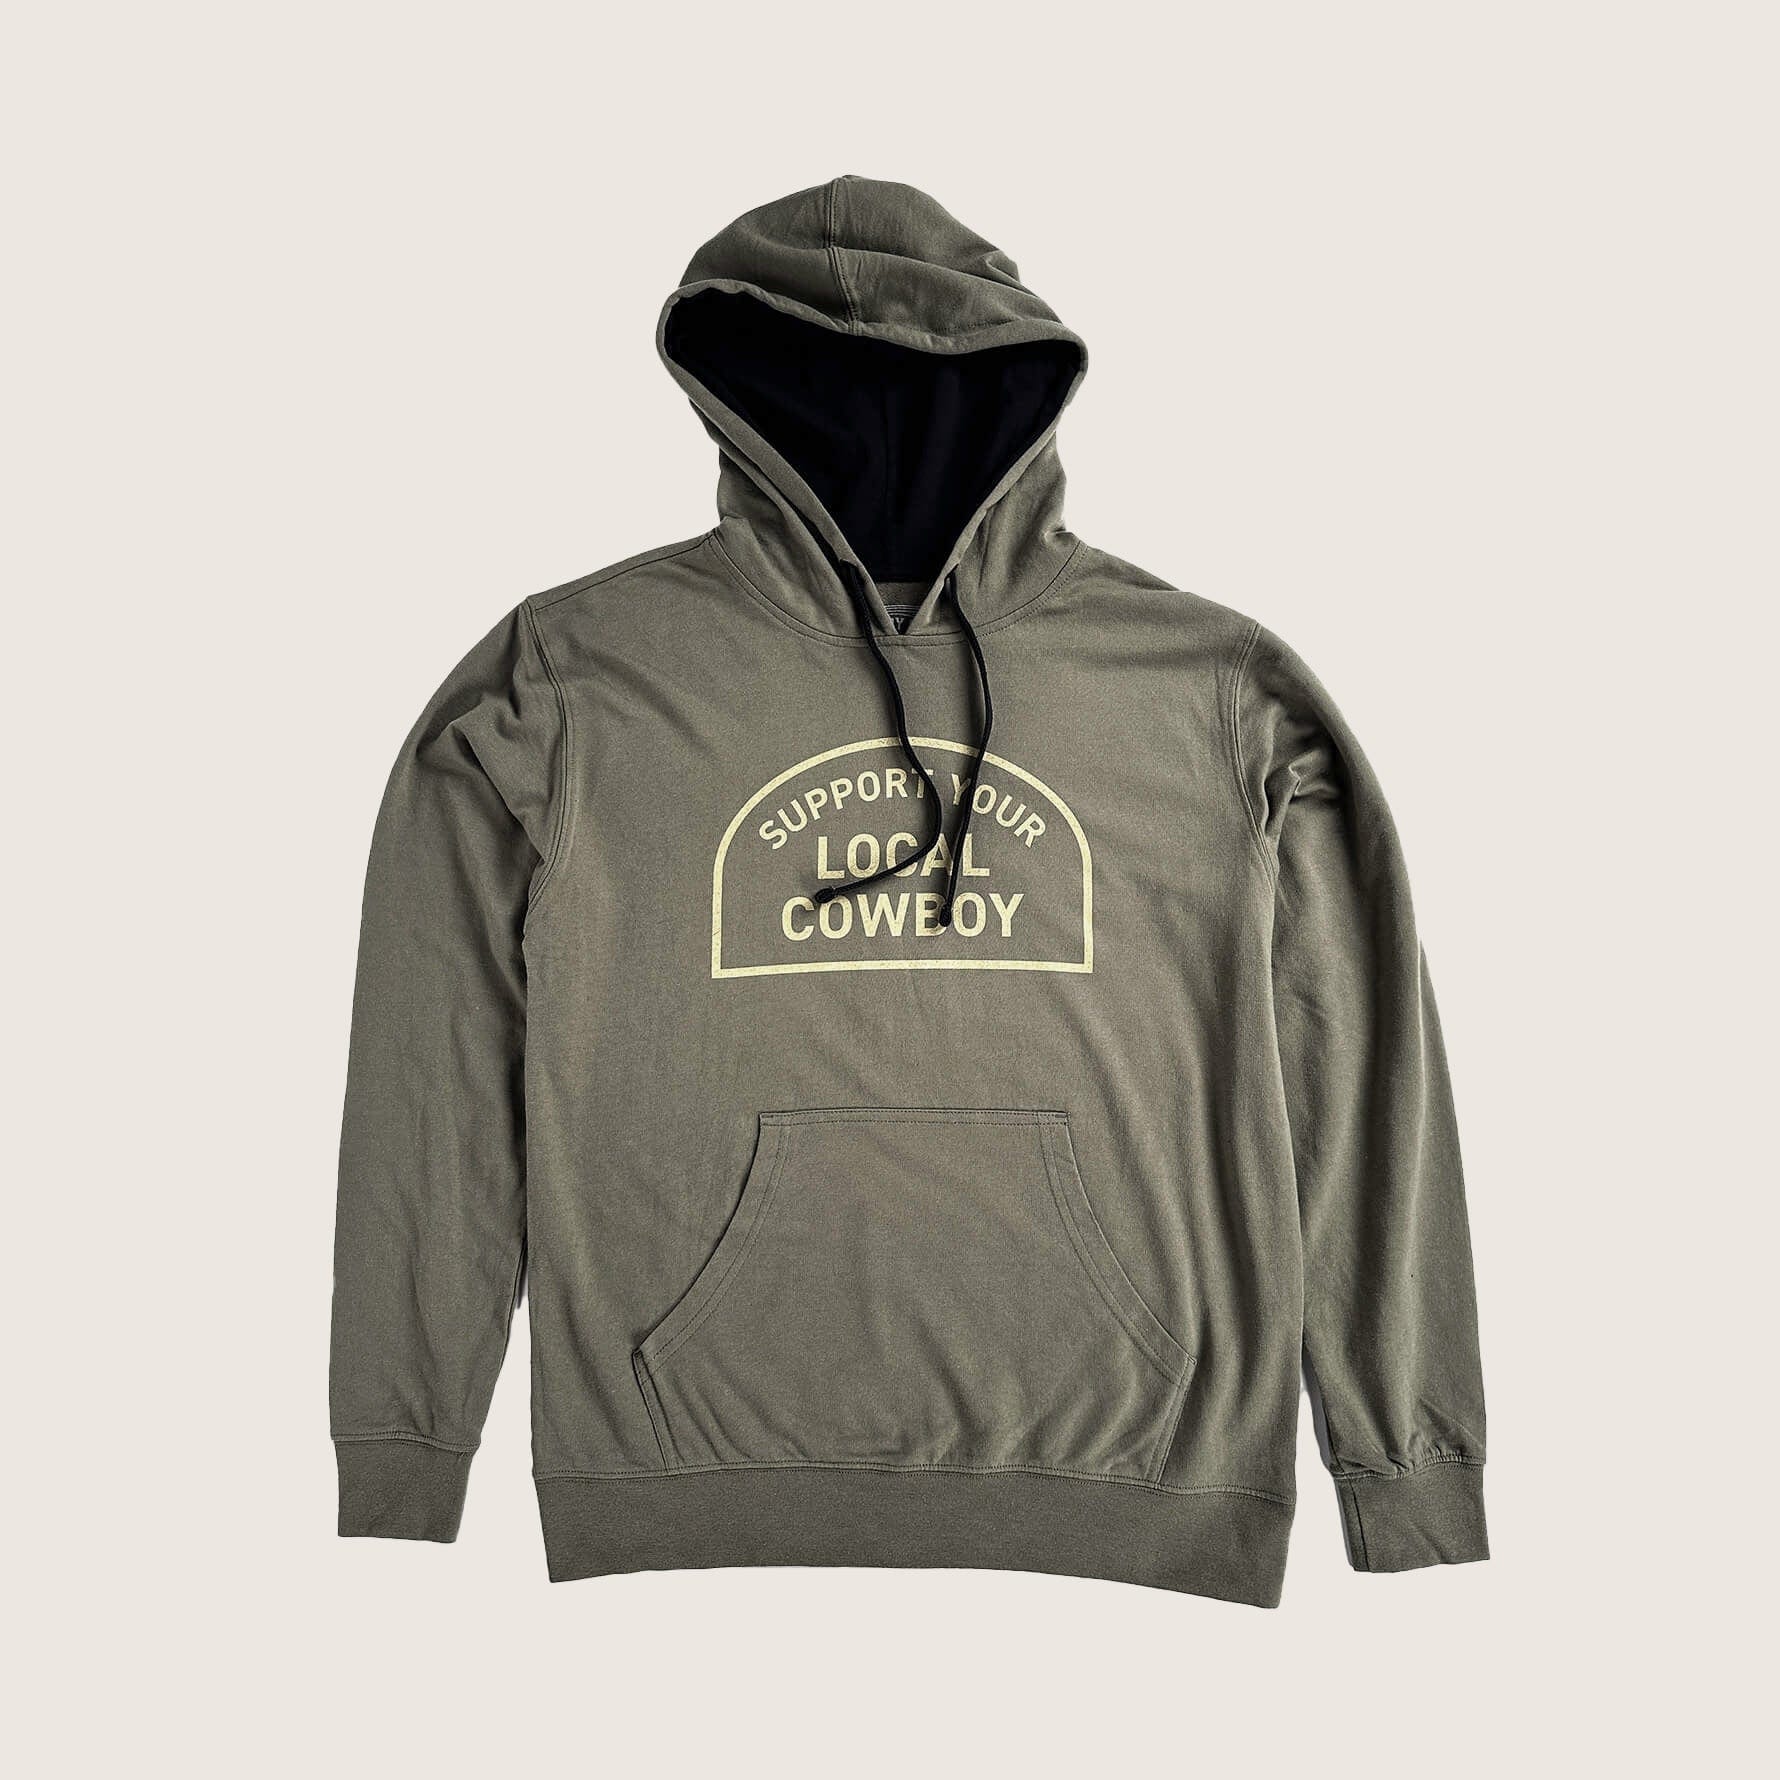 Cowboy Cool Outerwear Military Green/Black / S Support Your Local Cowboy Hoodie